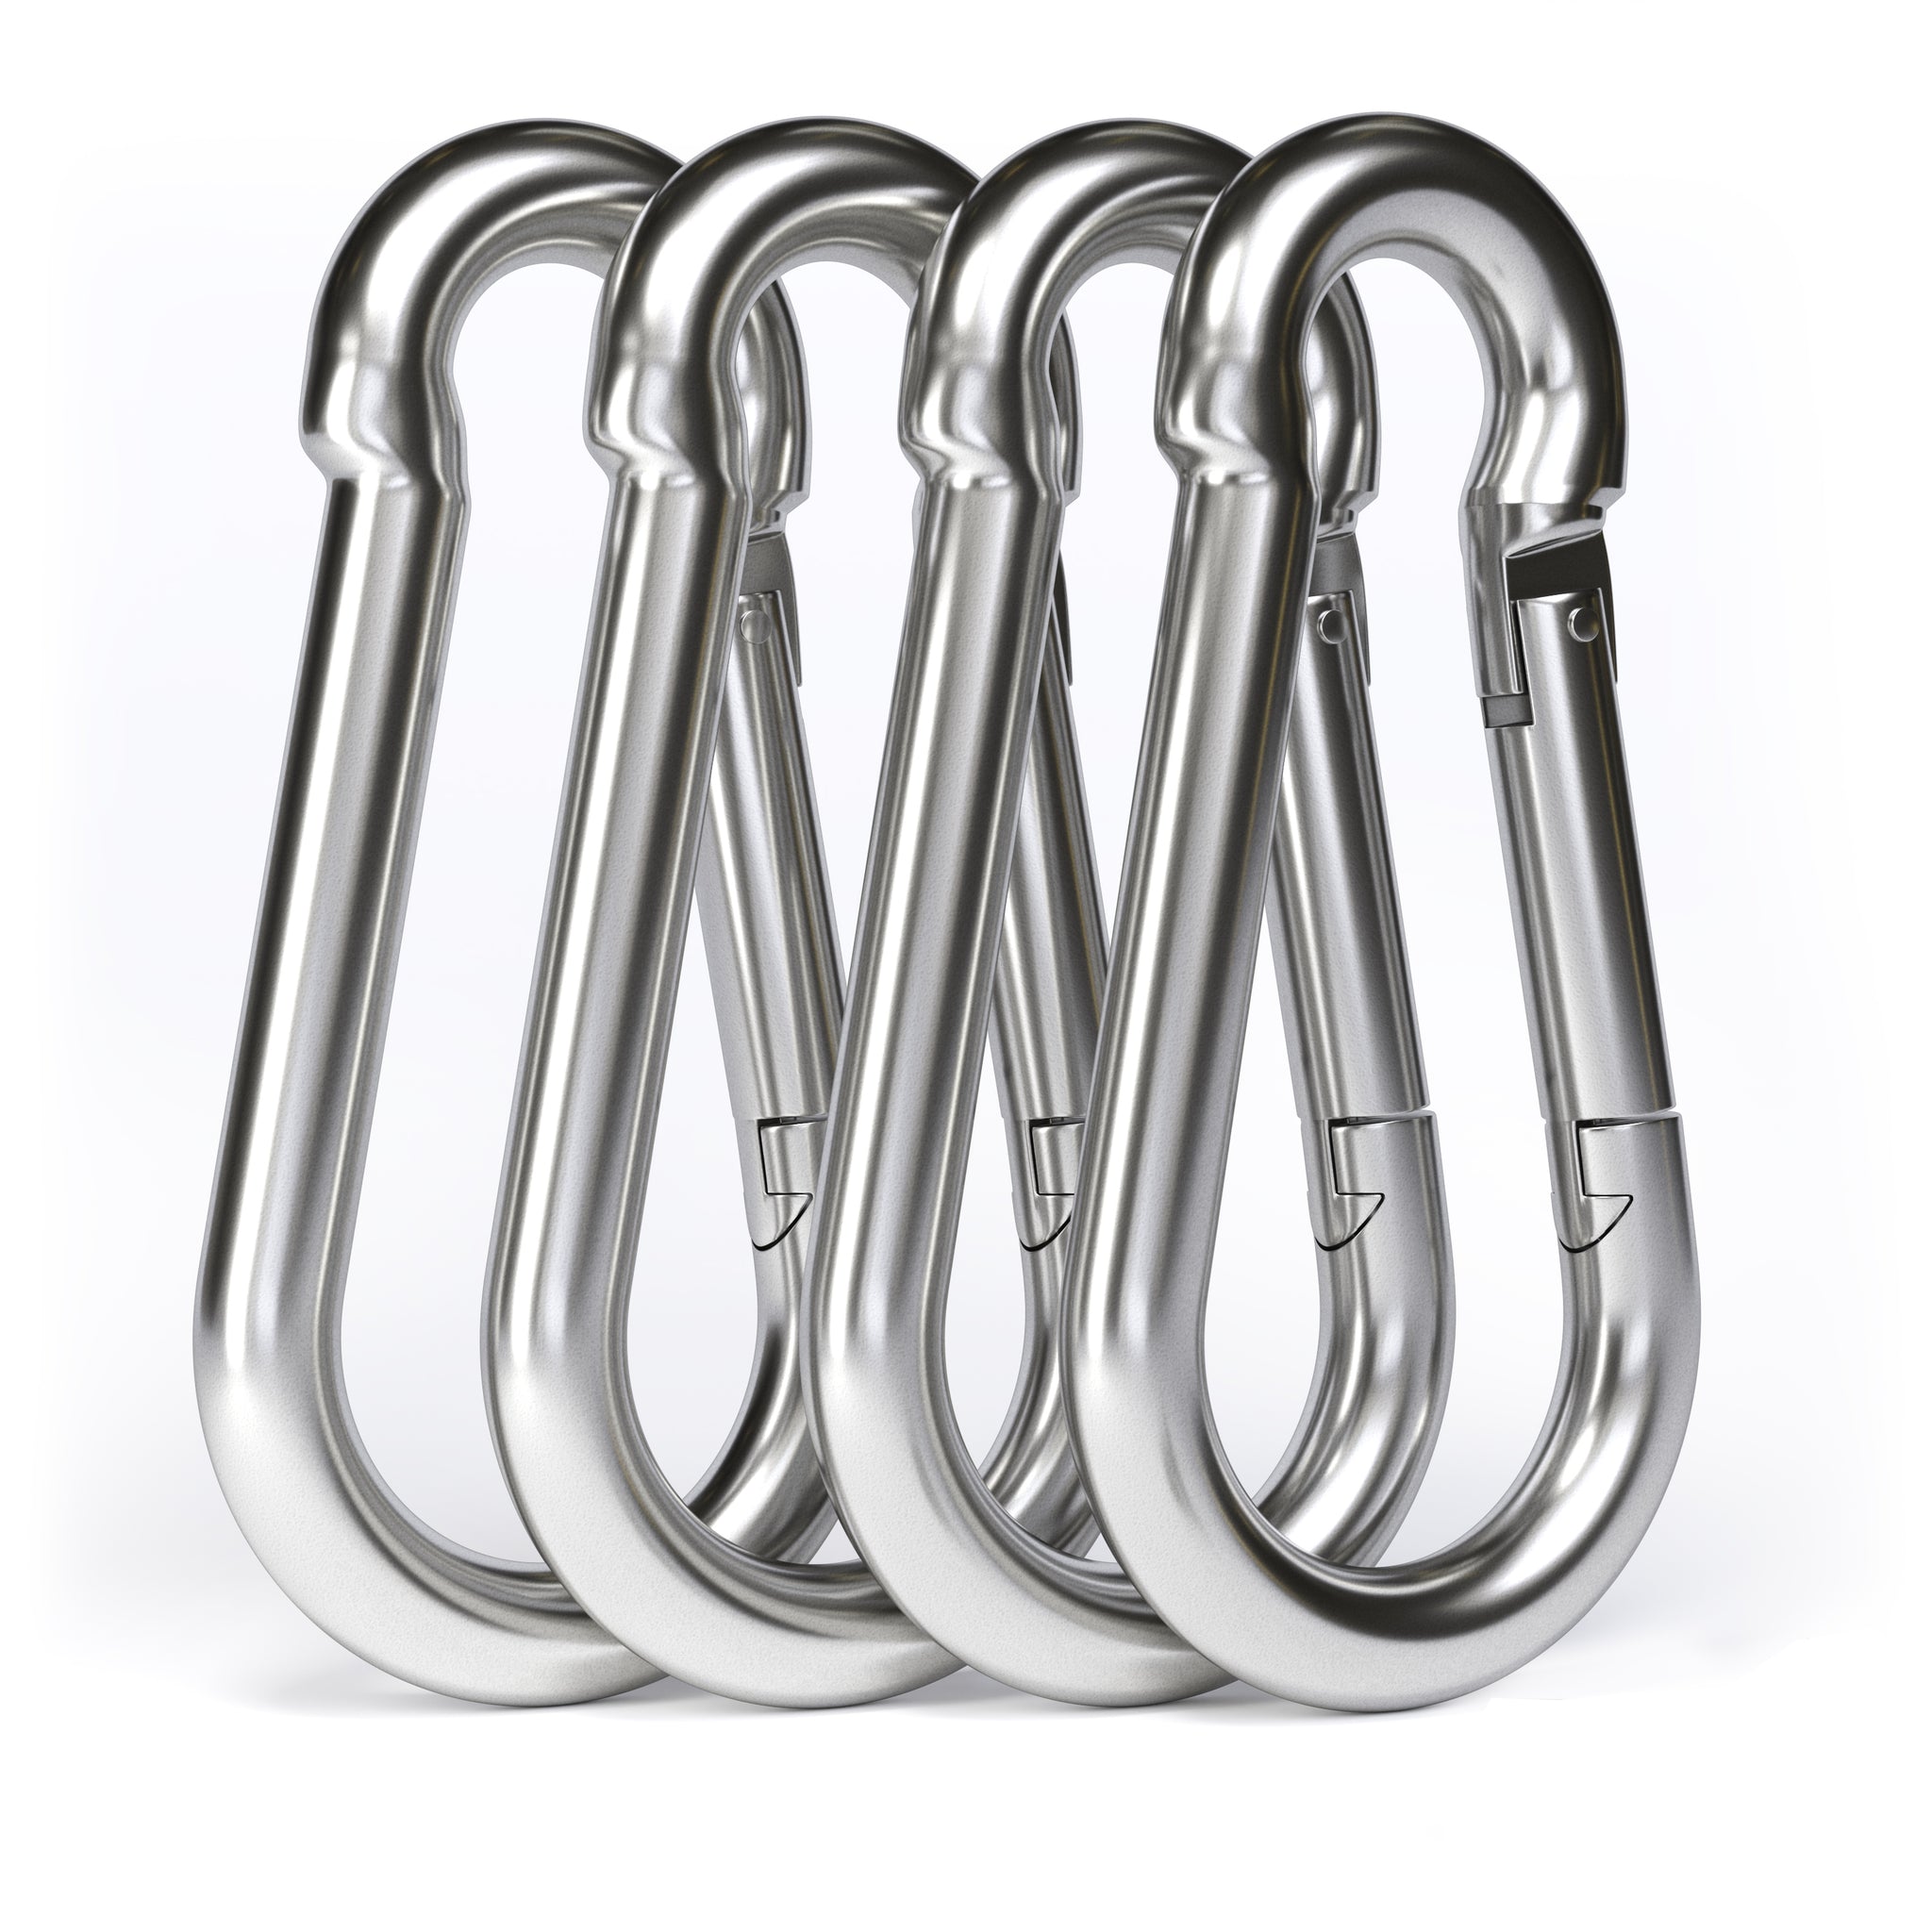 30 PCS Stainless Steel Carabiner Clip Spring-Snap Hook M4 1.8 Inch Heavy  Duty Carabiner Clips